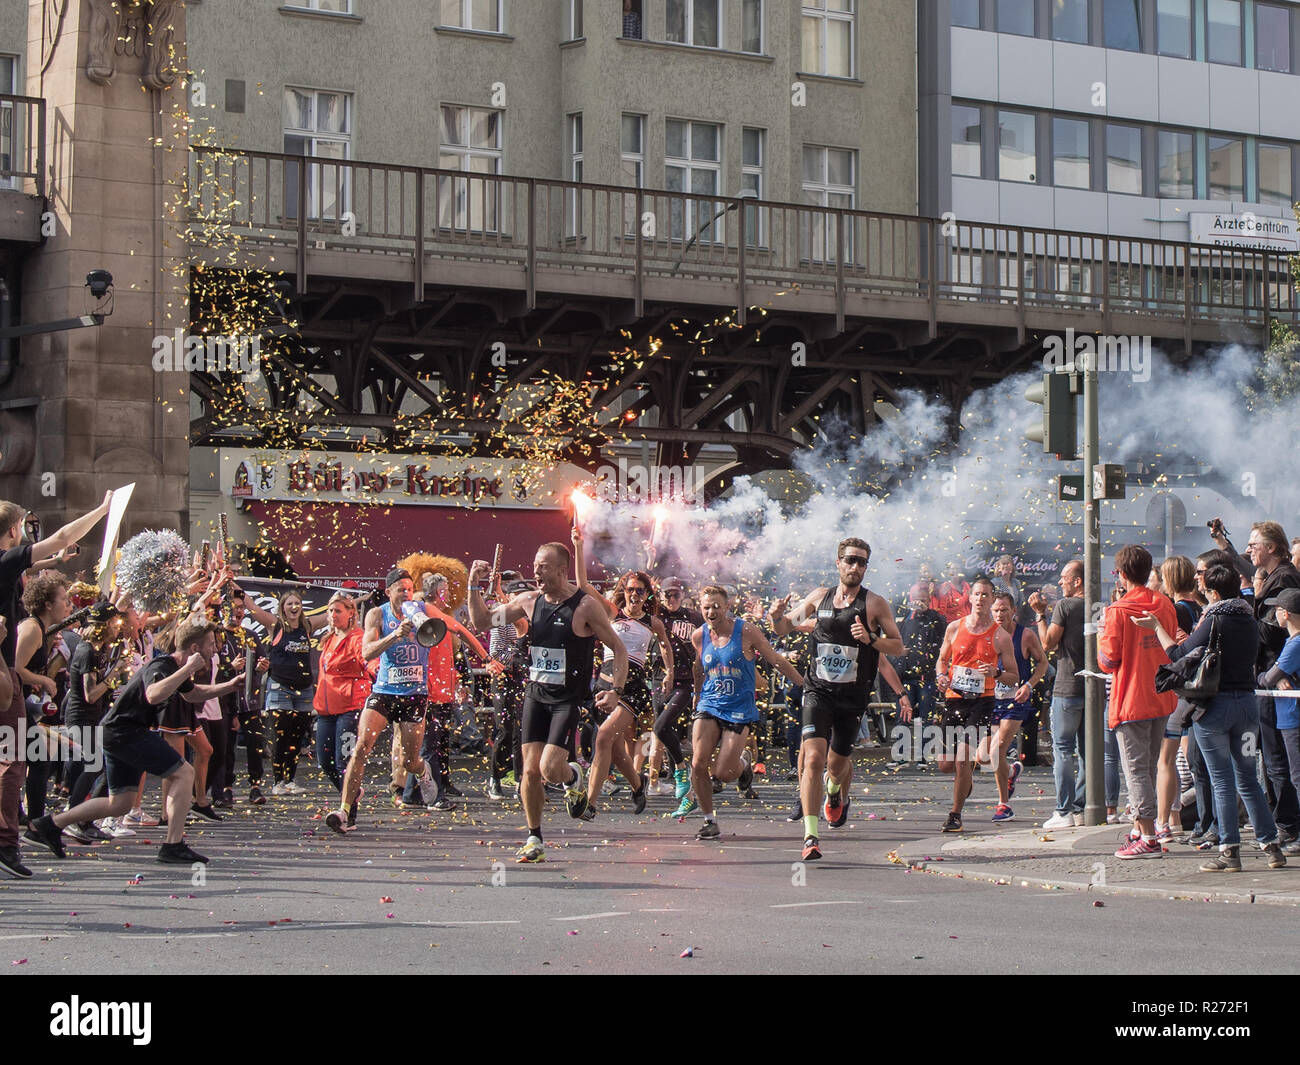 BERLIN, GERMANY - SEPTEMBER 25, 2016: Spectator With A Torch And Runners At Berlin Marathon 2016 Stock Photo